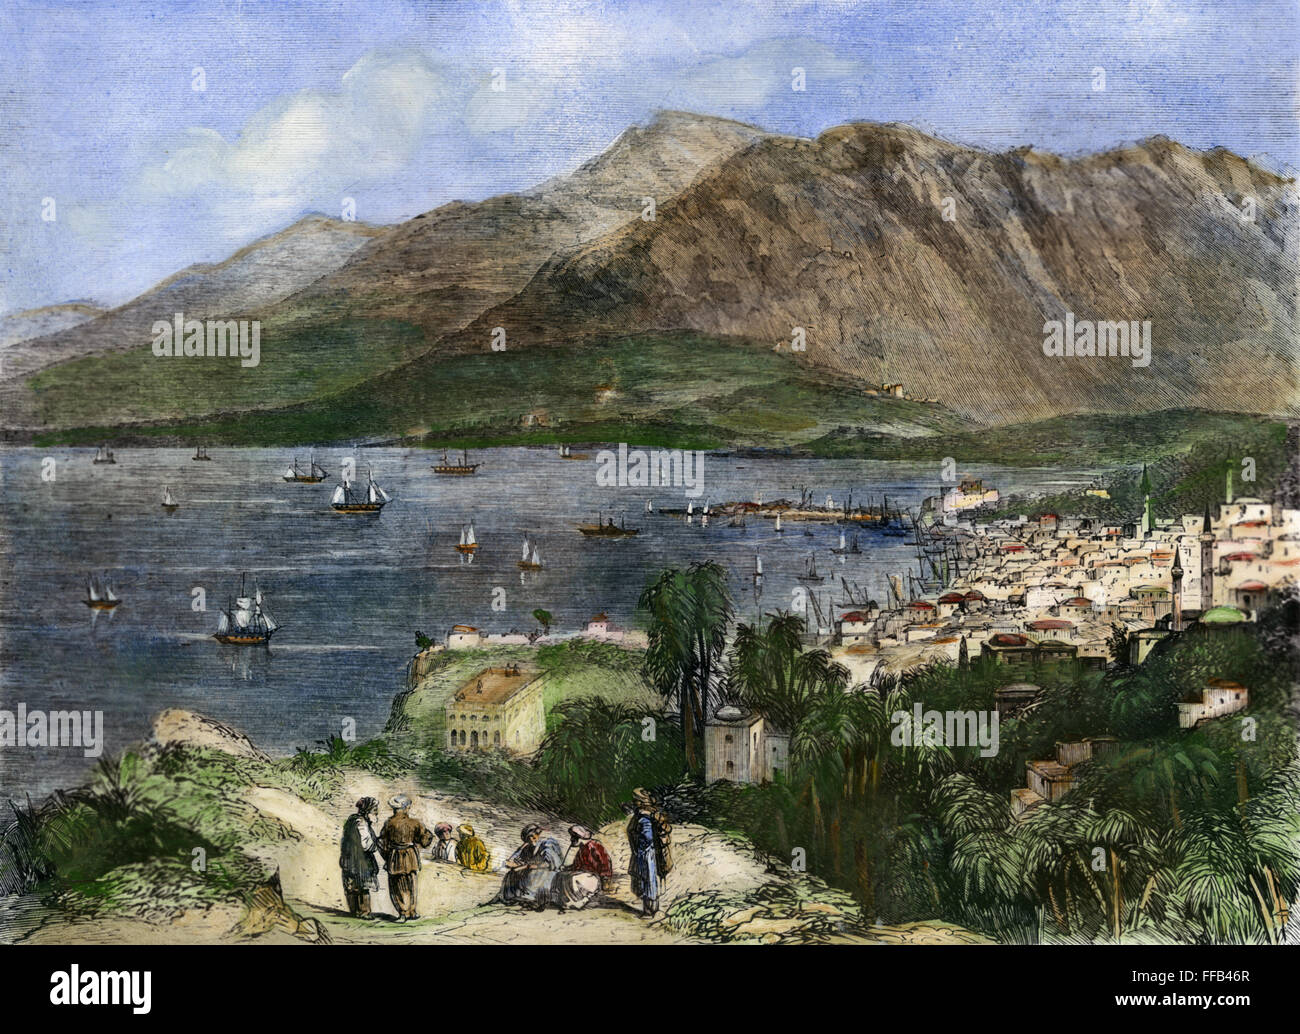 LEBANON: BEIRUT, 1860. /nThe city of Beirut at the foot of Mount Lebanon. Colored engraving, English, 1860. Stock Photo